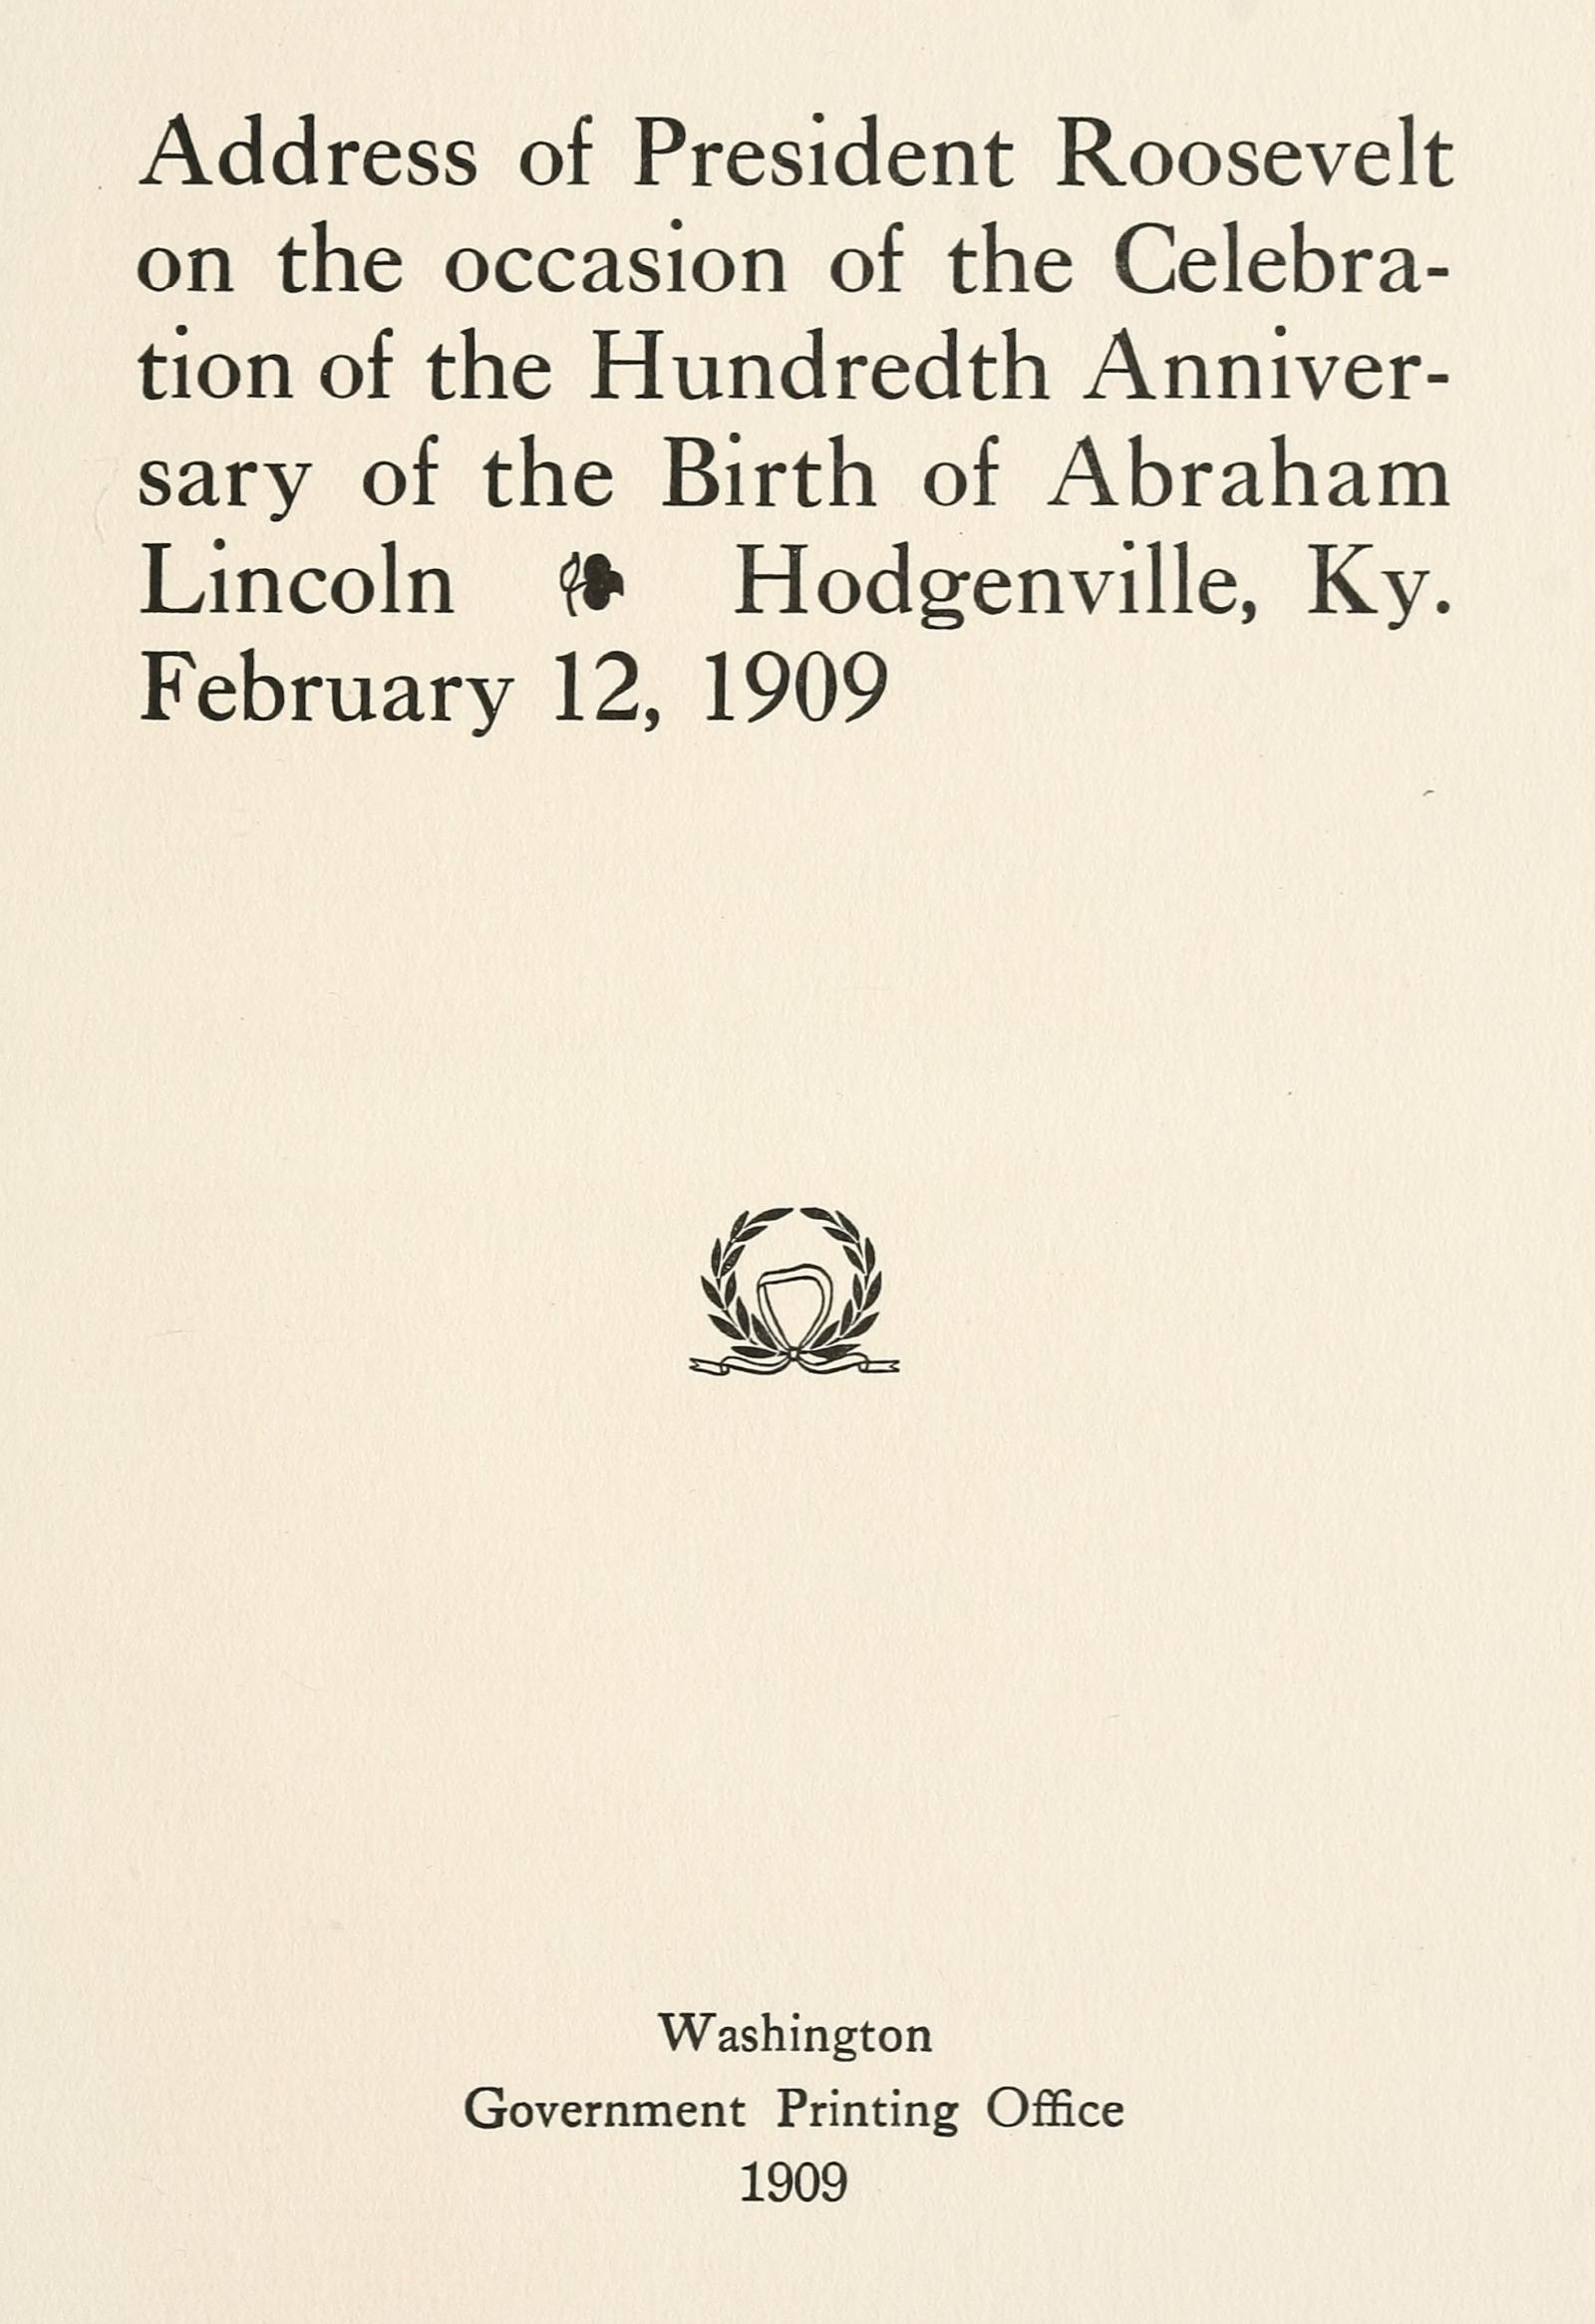 Address of President Roosevelt on the occasion of the celebration of the hundredth anniversary of the birth of Abraham Lincoln, Hodgenville, Ky., February 12, 1909